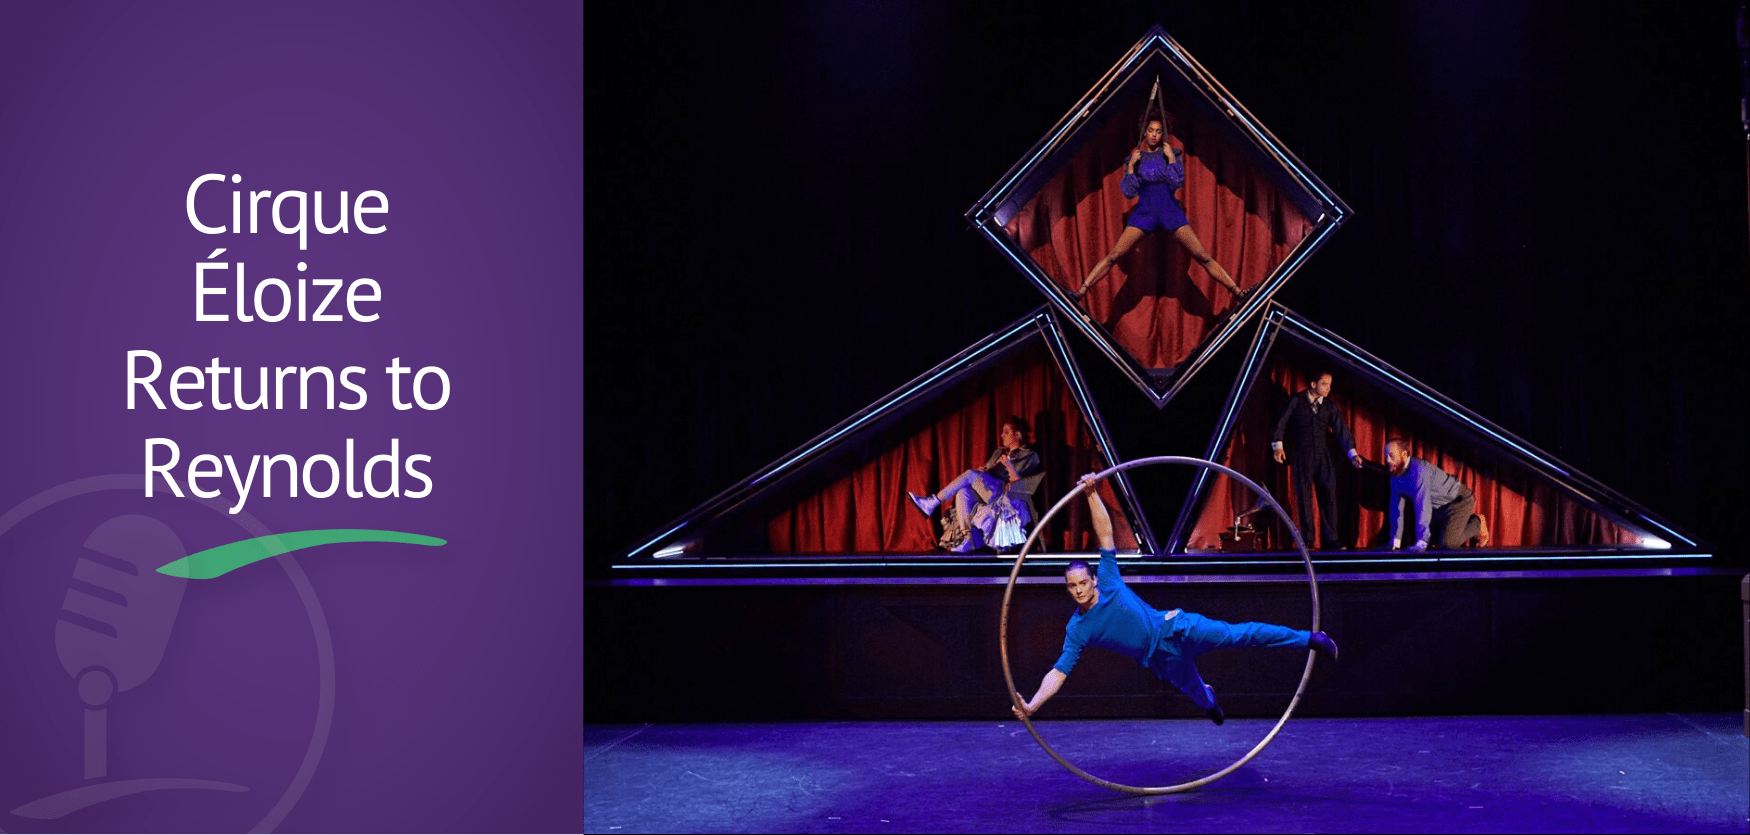 Featured image: Cirque Éloize Returns to Reynolds With Contemporary Circus Show